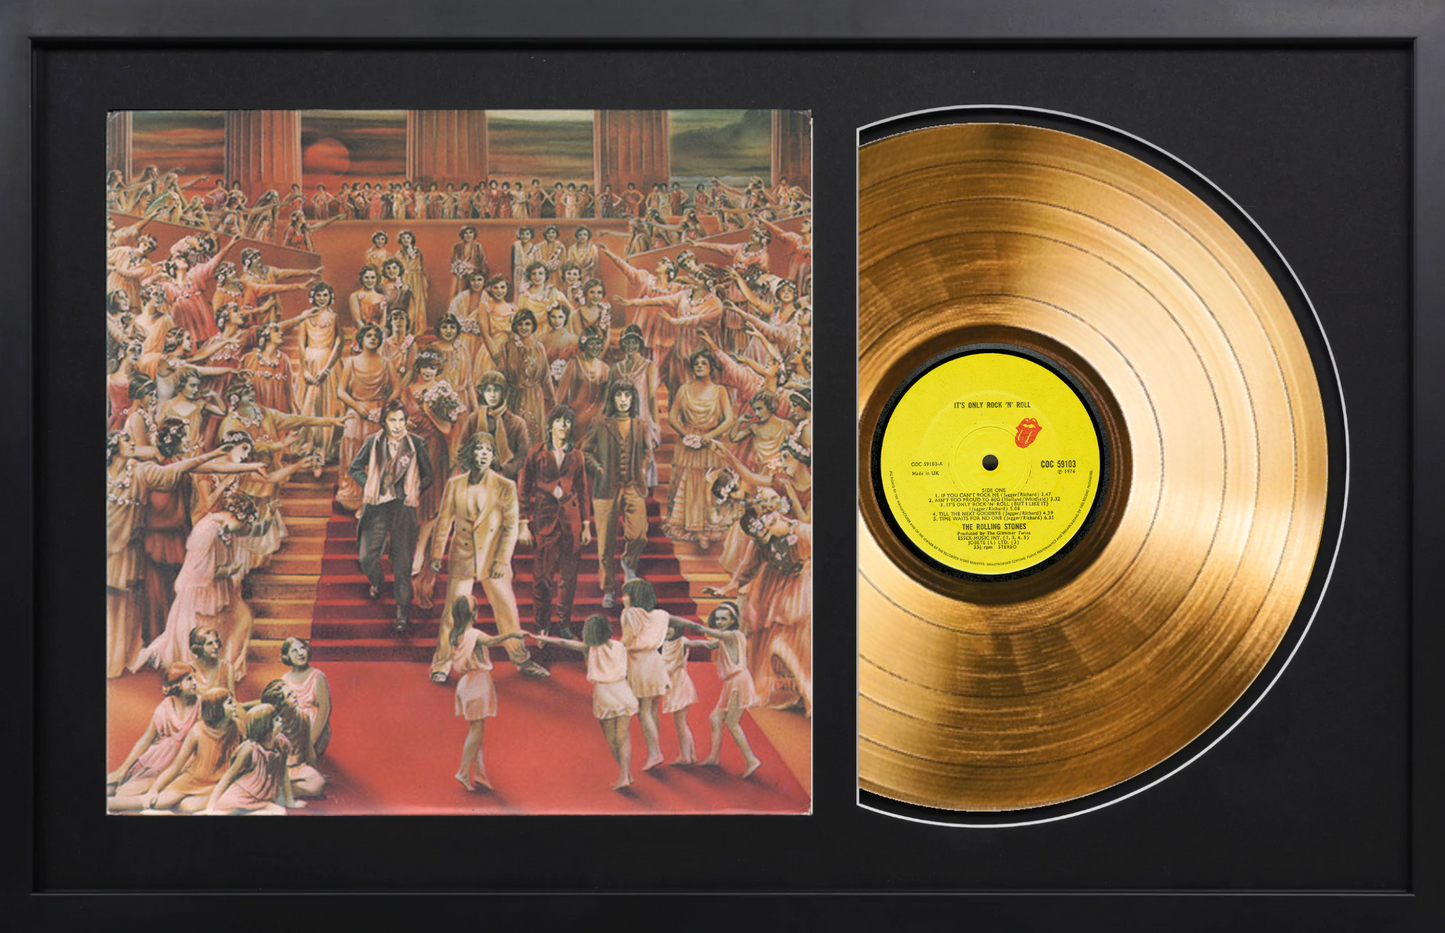 The Rolling Stones - It's Only Rock 'n Roll - 14K Gold Framed Album